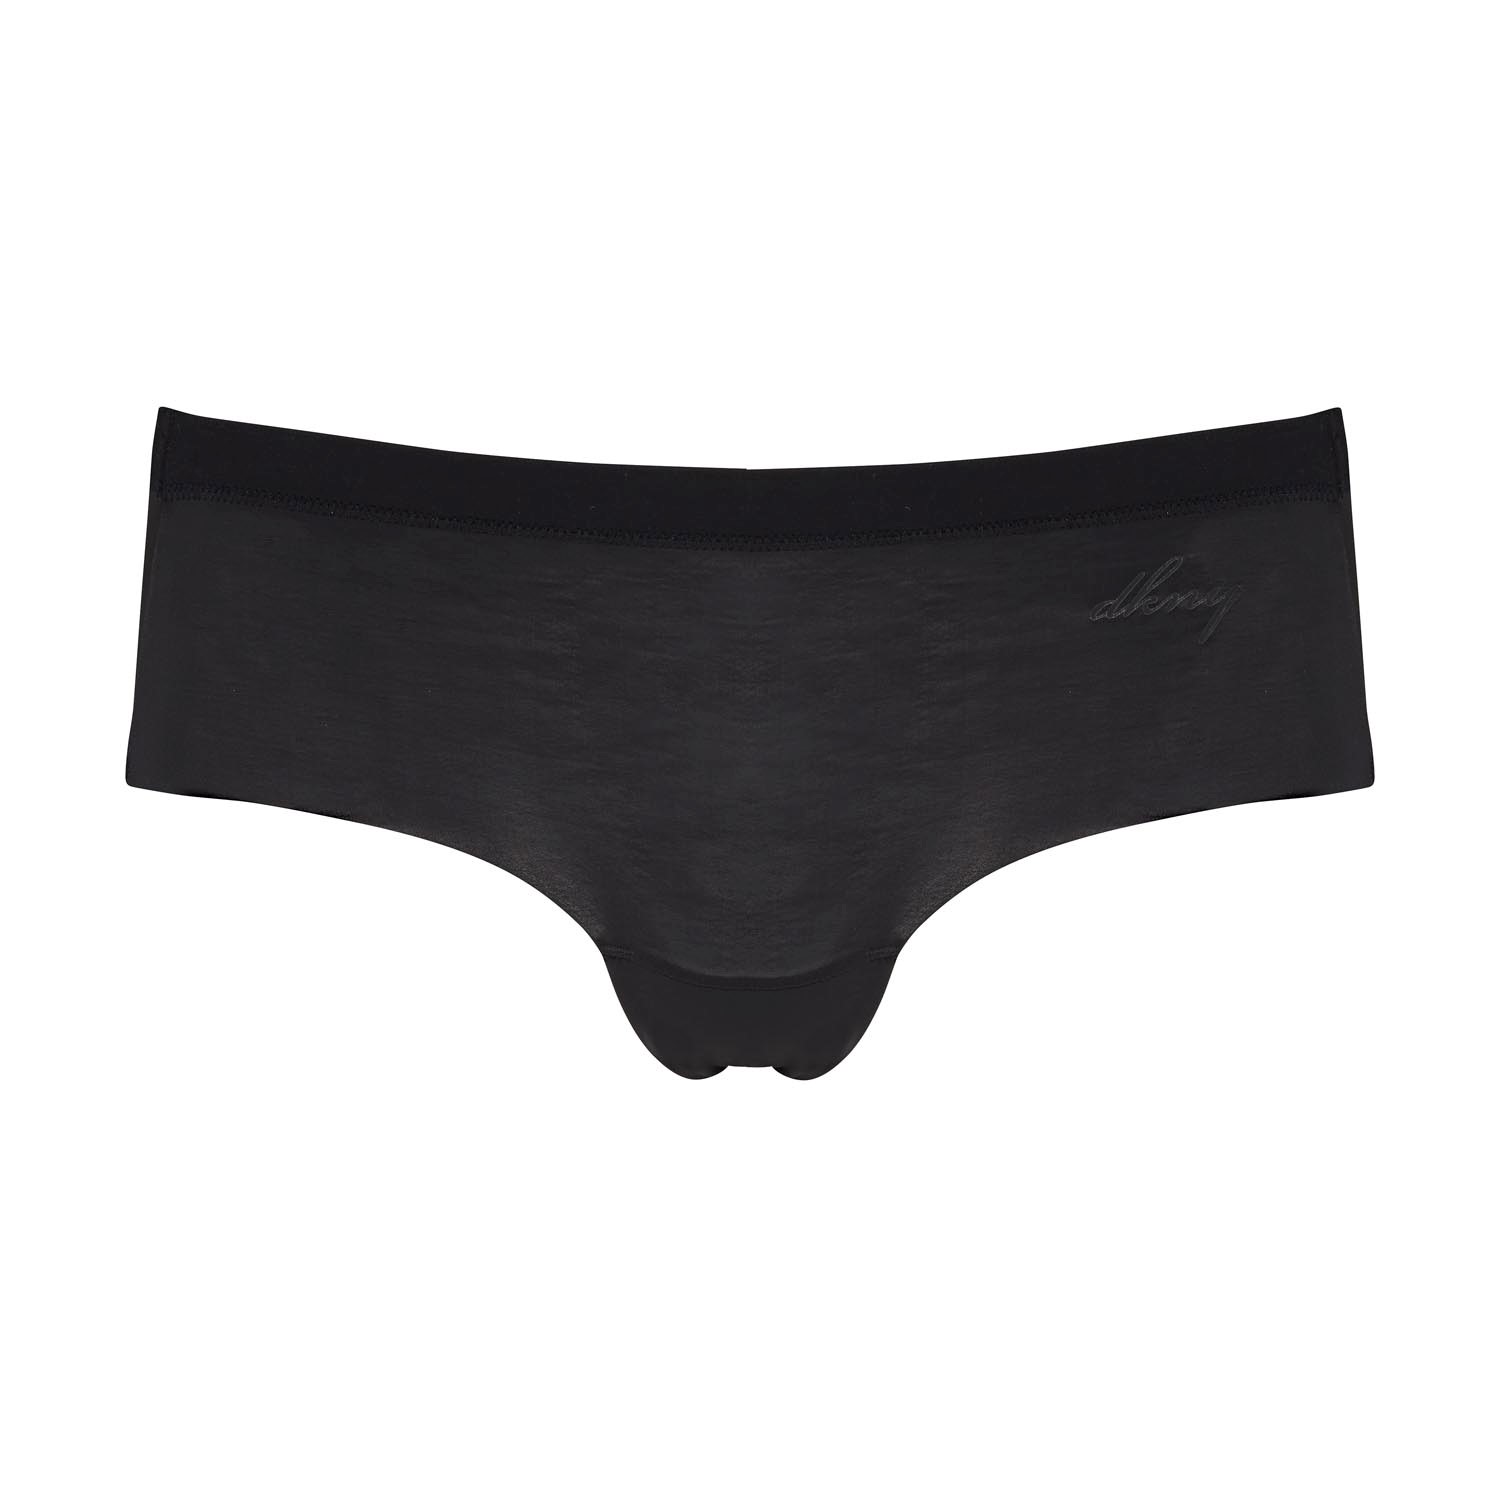 DKNY Fusion Hipster - Hipster - Briefs - Underwear - Timarco.co.uk